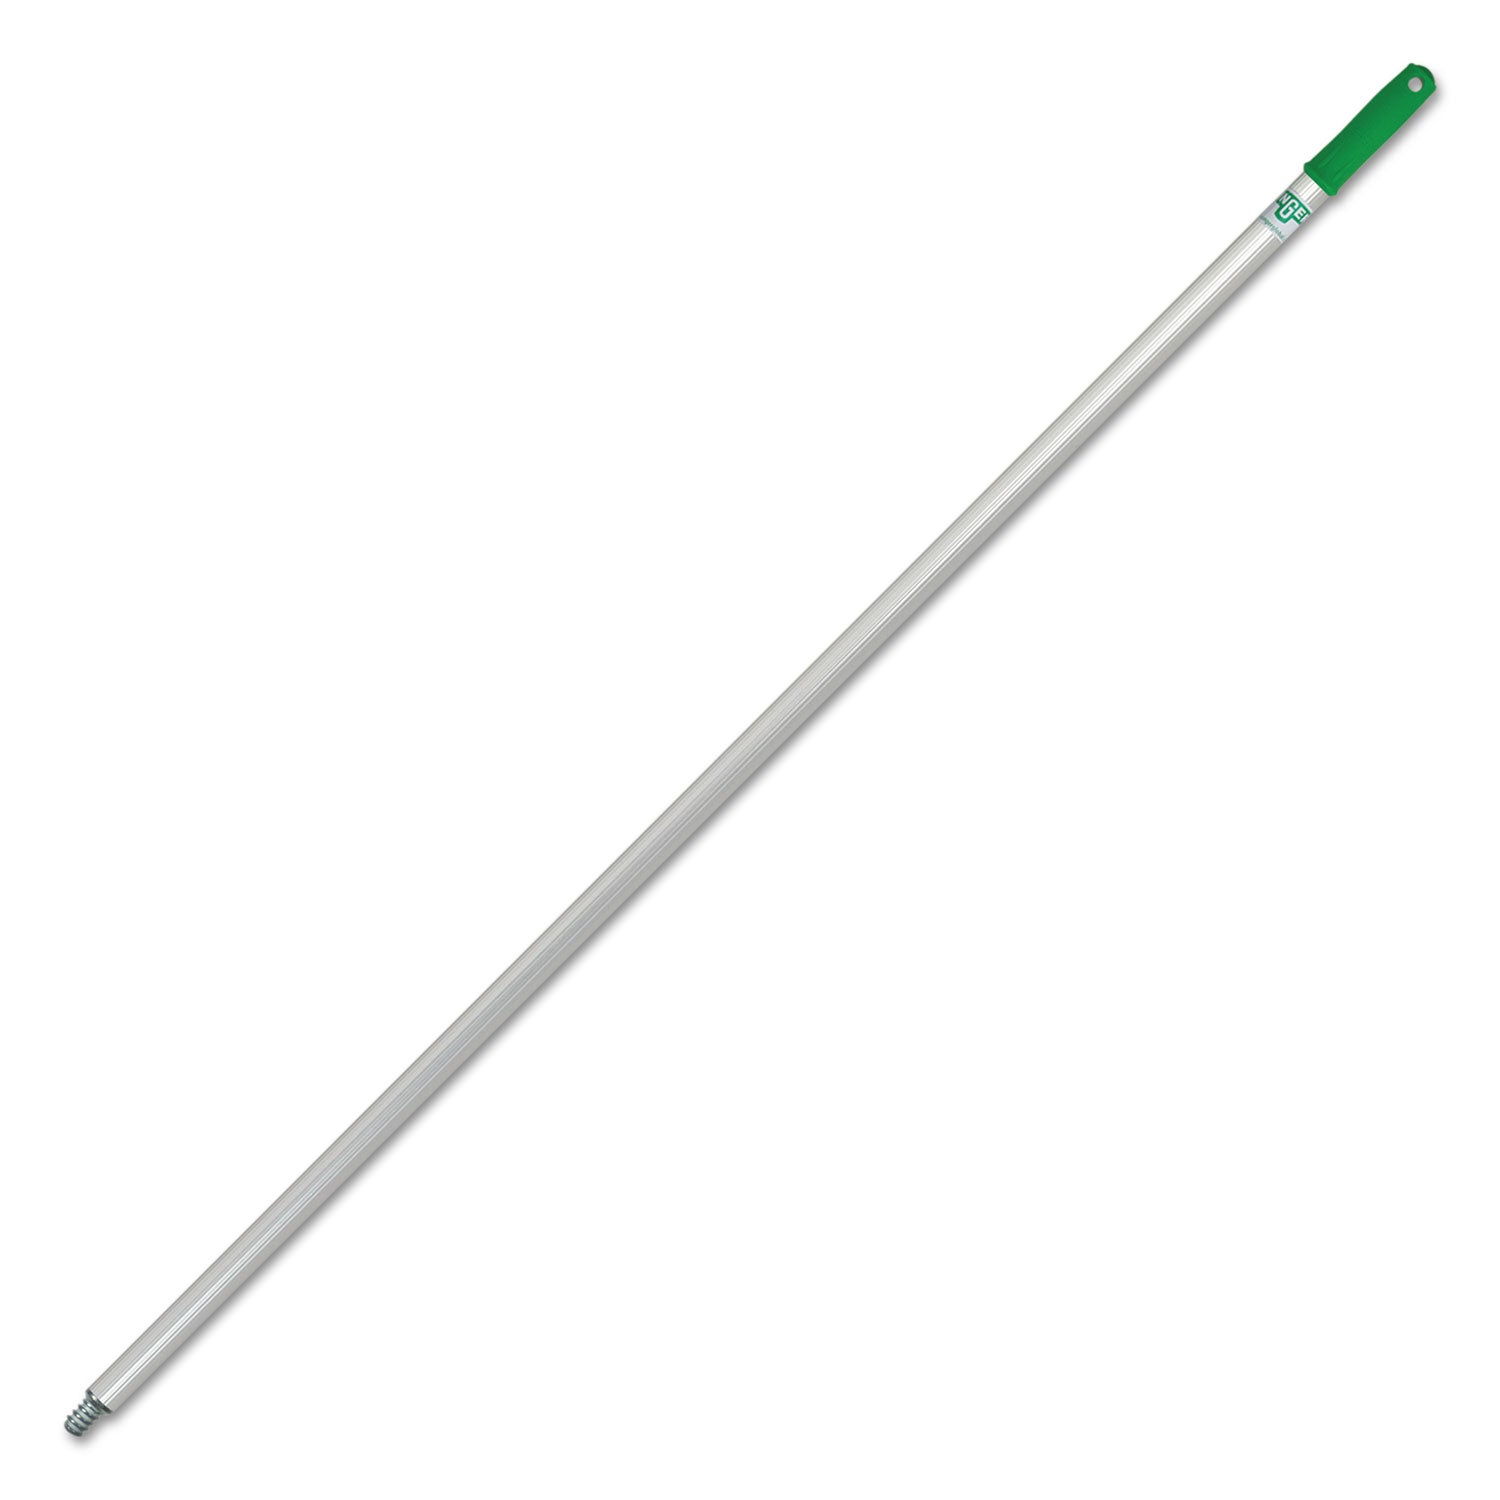 Pro Aluminum Handle for Floor Squeegees, Acme, 58 - 